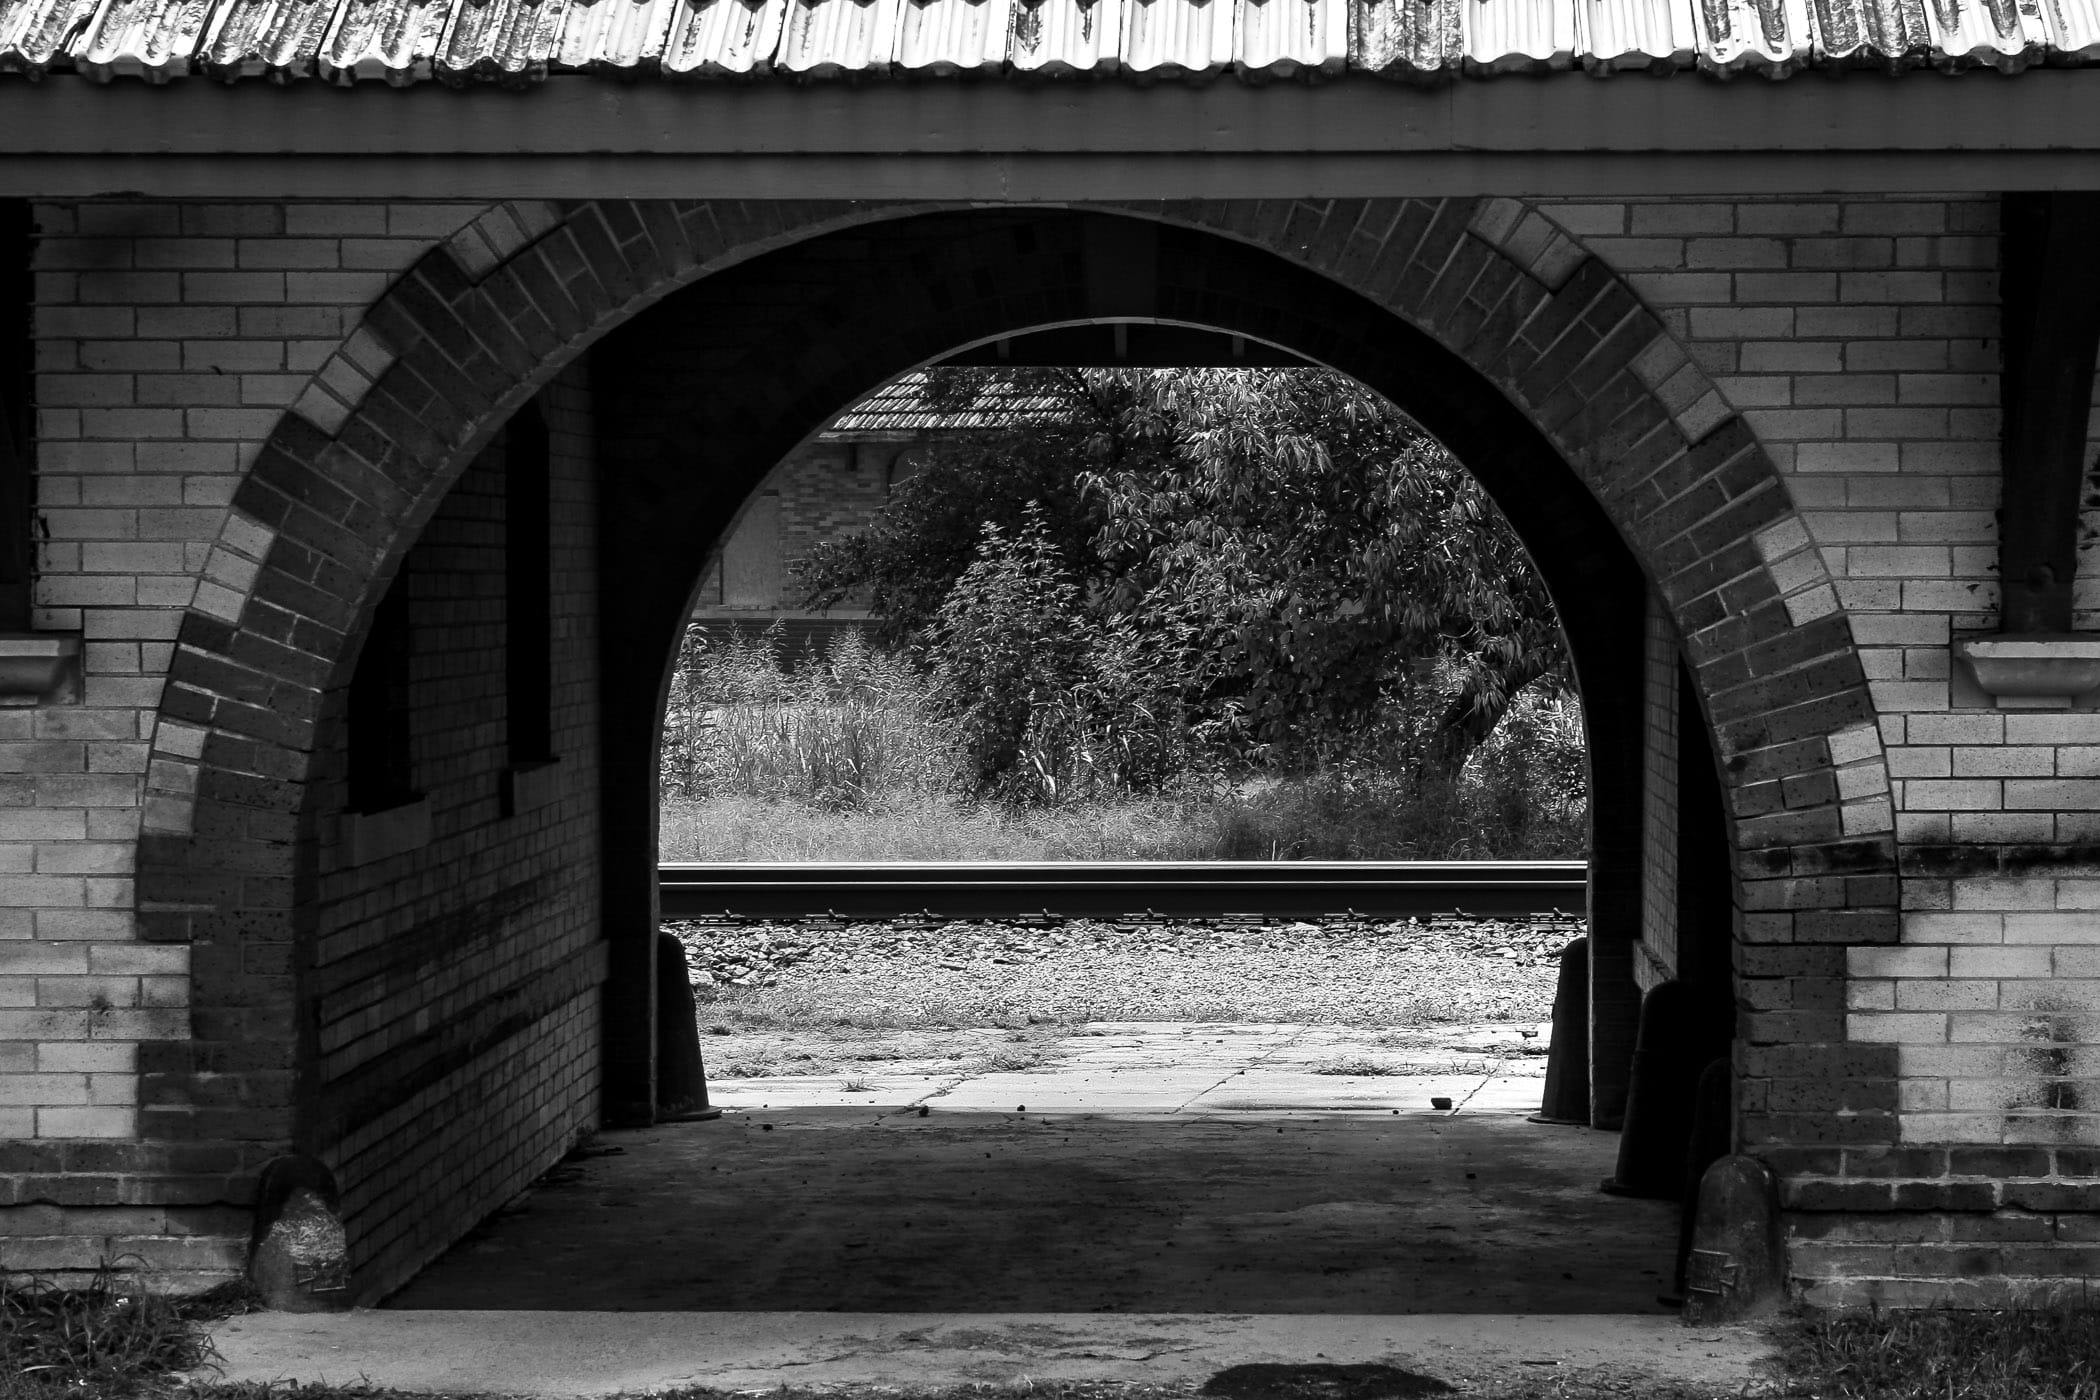 Detail of an old train depot in Waxahachie, Texas.